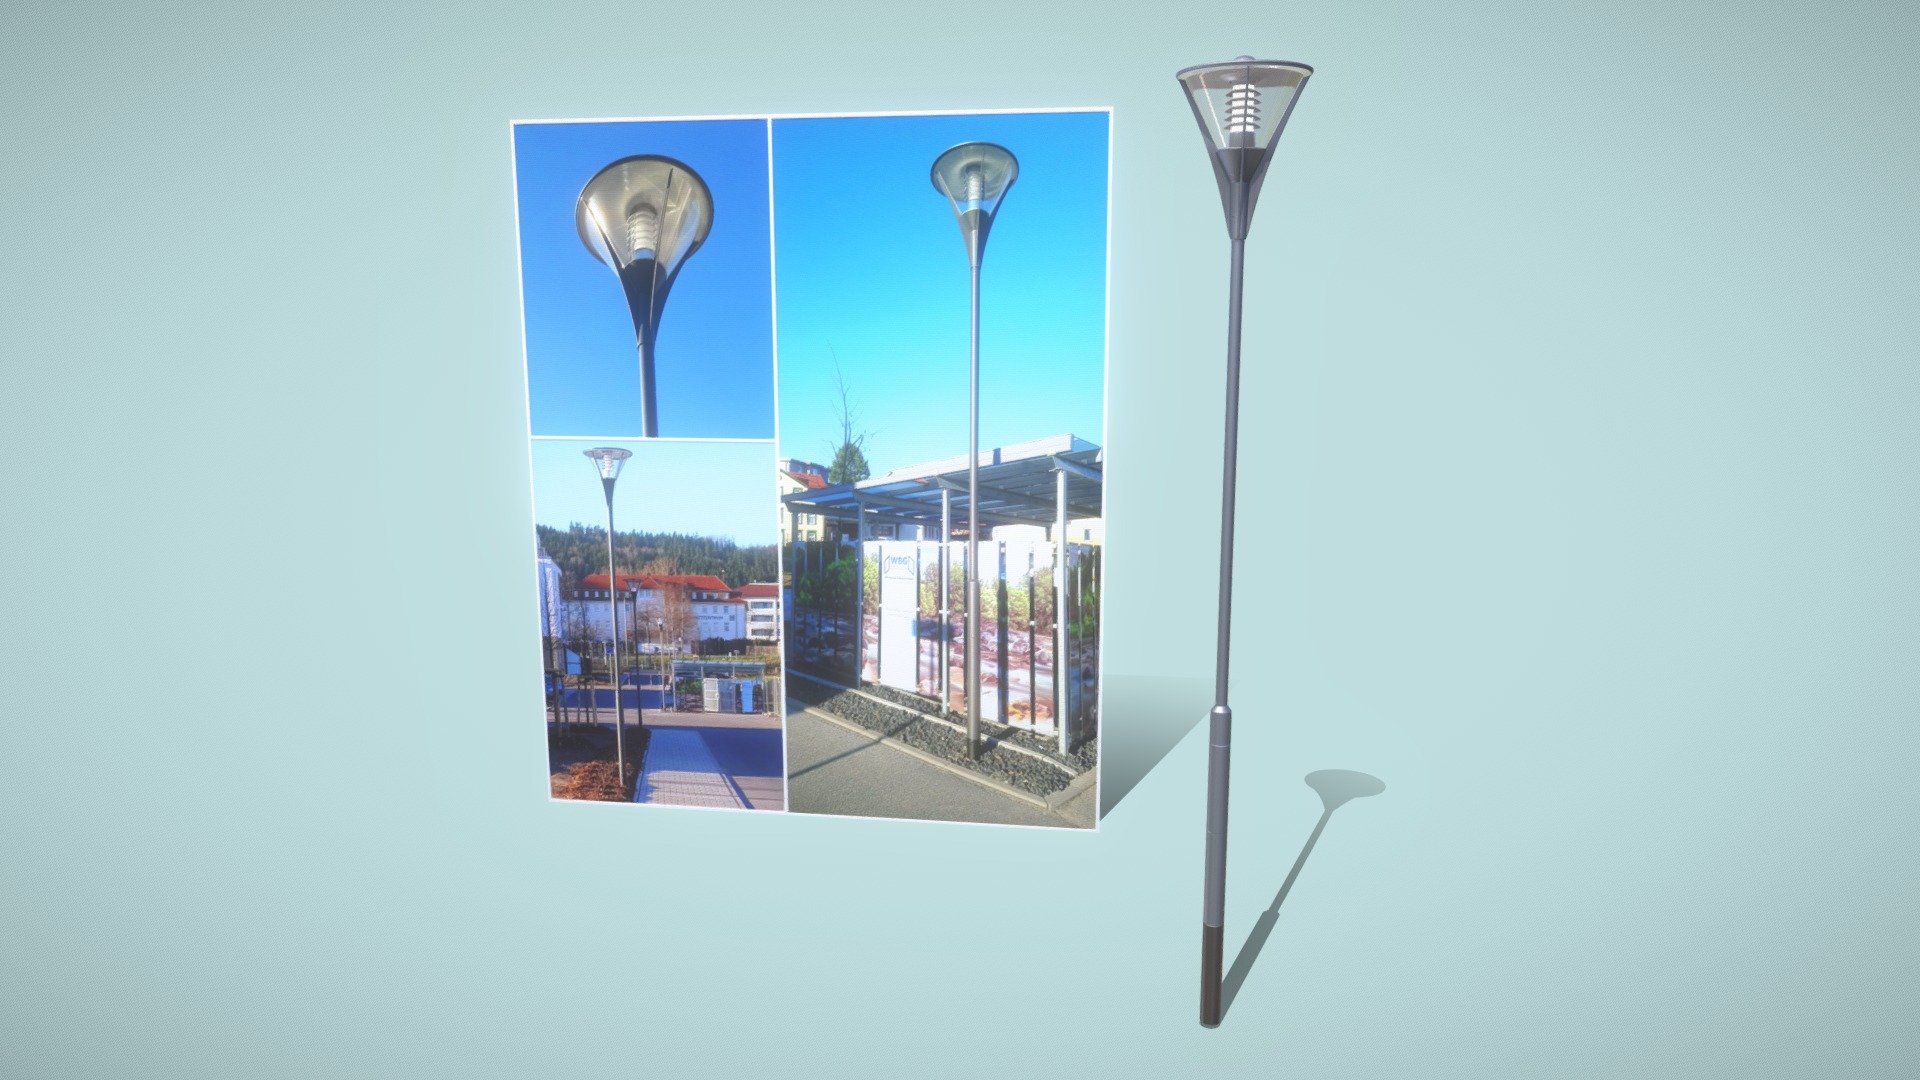 The basic low-poly version of street light no.6




Street Light (6) (High-Poly Version Total triangles 442.1k )

Street Light (6) (Low-Poly Basic Version)

Street Light (6) (Low-Poly Green Version)

Street Light (6) (Low-Poly Matt Black Version)



**Here are some other Street Lights: **




Street Light (1) (Low-Poly-Version)

Street Light (1) Station Clock (High-Poly)

Street Light (2) Wall-Version (High-Poly)

Street Light (3) (Low-Poly Version)

Street Light (4) (High-Poly Version)

Street Light (5) High-Poly Version



Modeled and textured by 3DHaupt in Blender-3D - Street Light (6) (Low-Poly Basic Version) - Buy Royalty Free 3D model by VIS-All-3D (@VIS-All) 3d model